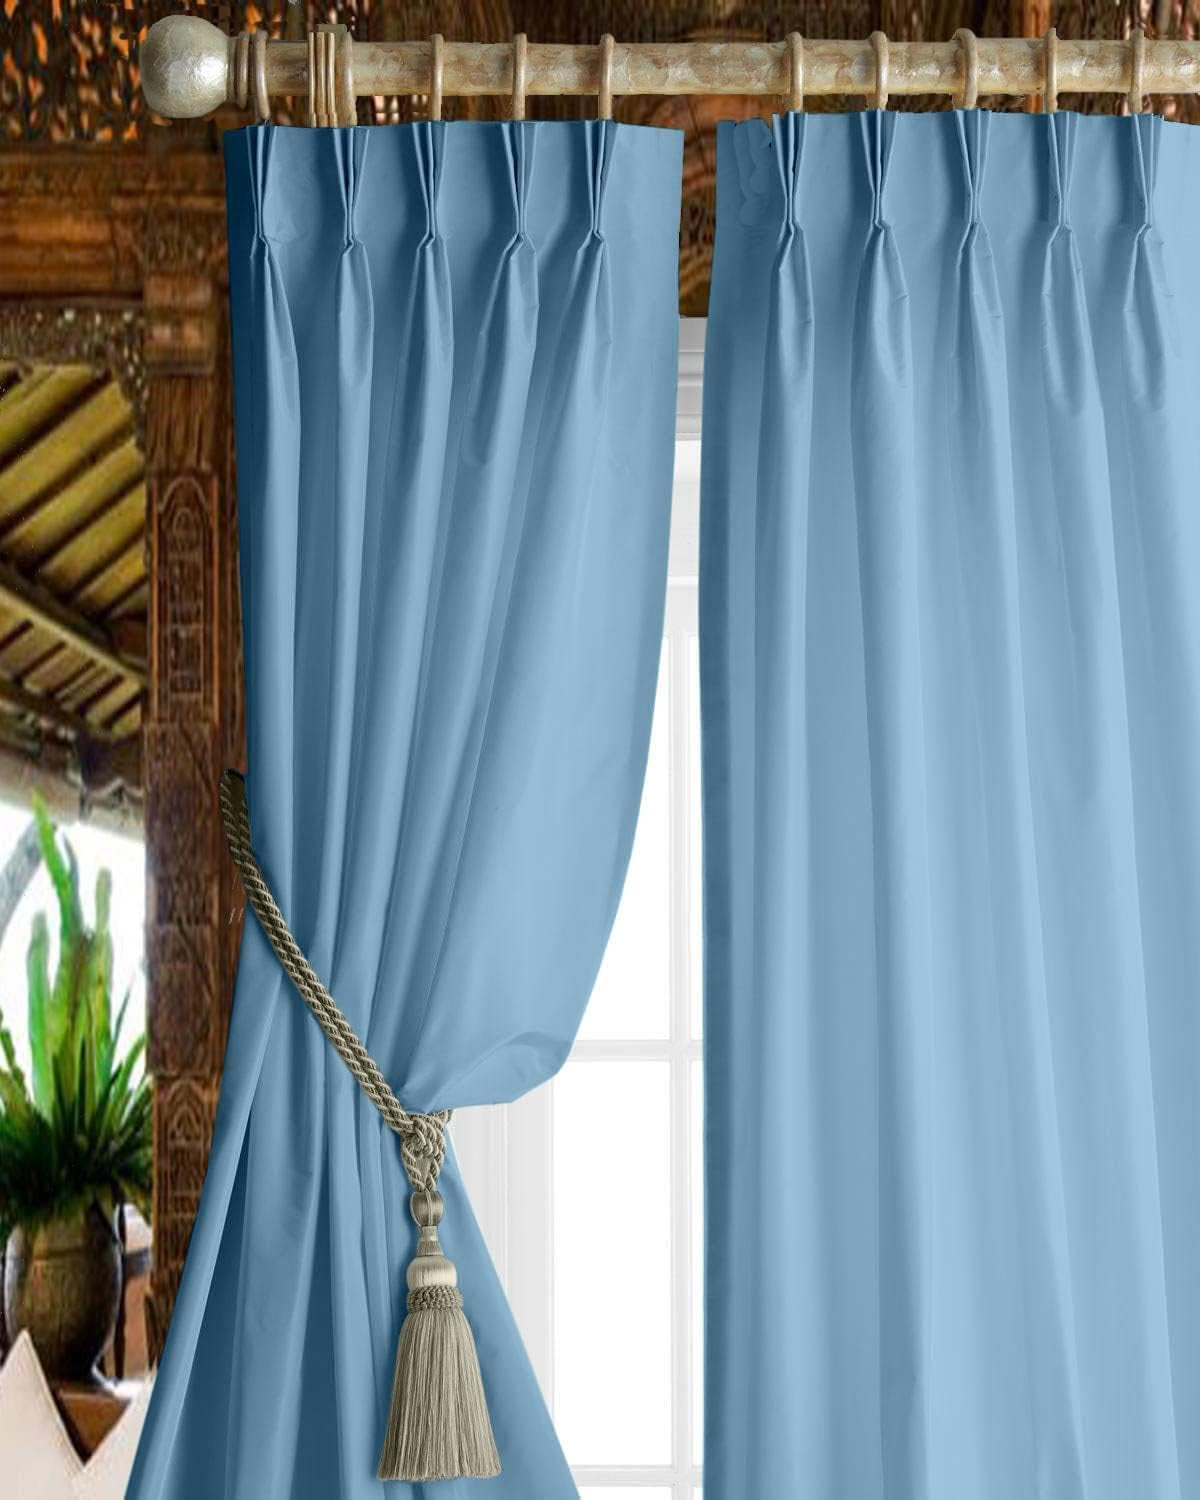 Magic Drapes Pinch Pleated Curtains Triple Pinch Pleat Drapes with Tiebacks & Hooks Blackout Thermal Room Darkening Window Curtains for Living Room, Bedroom, Hall W(26"+26") L45 (2 Panels, Royal Blue)  Magic Drapes Solid - Sky Blue 42"X 84" 